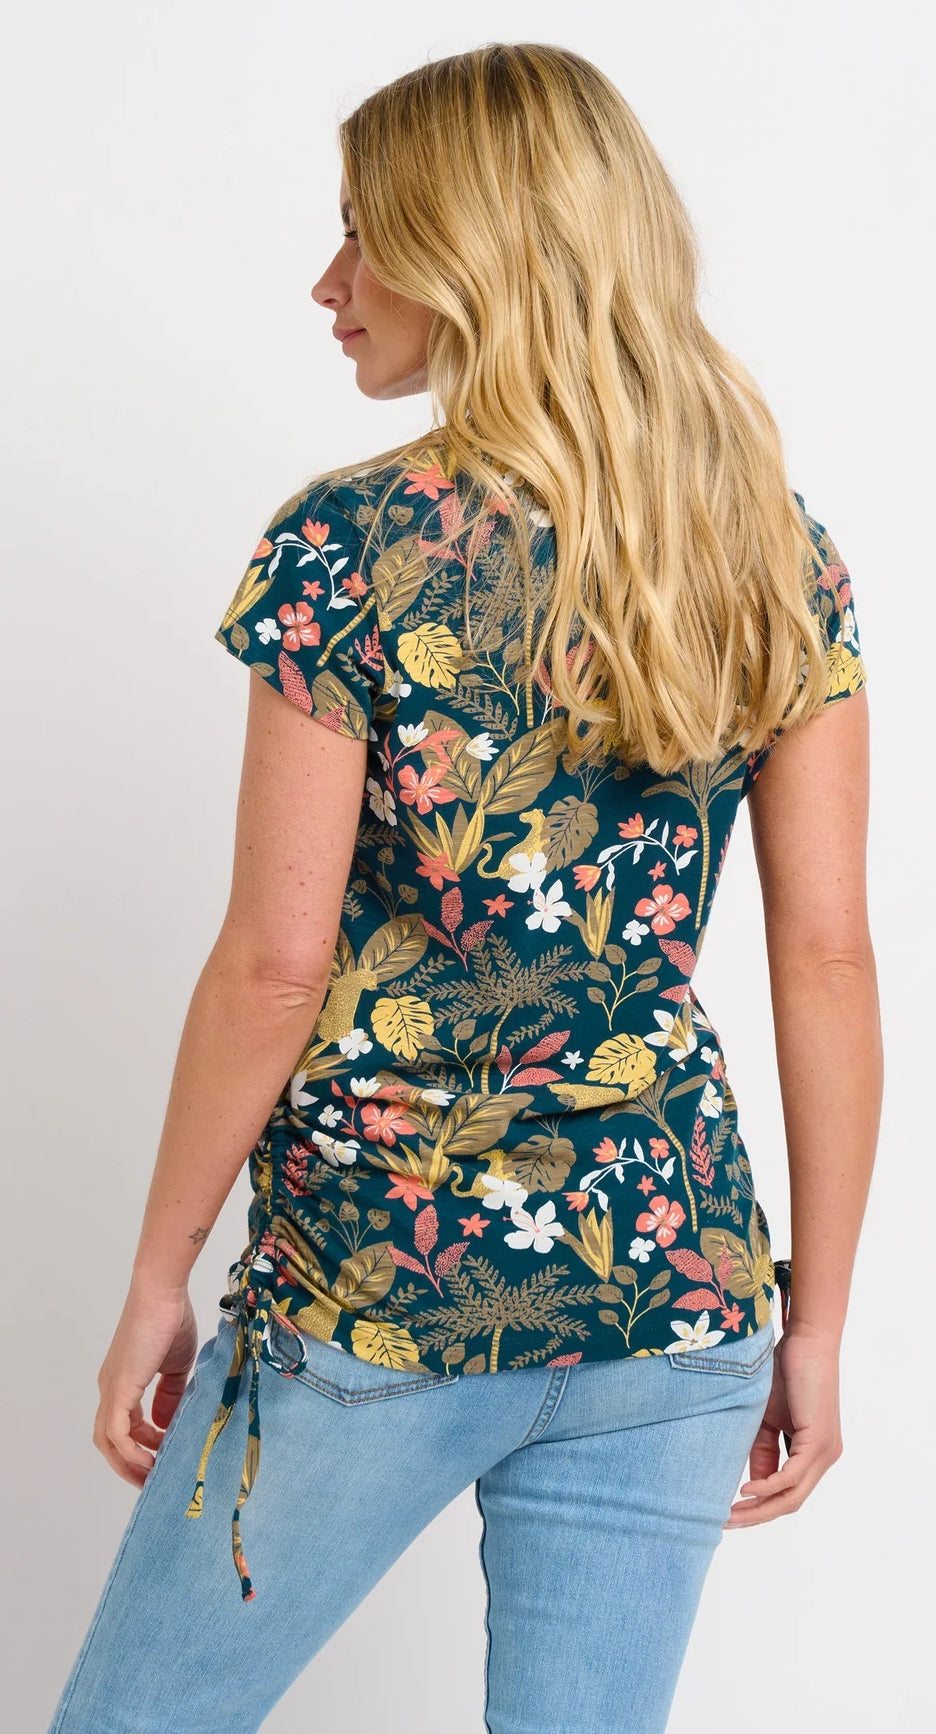 A women's short sleeve tee from Brakeburn featuring a rainforest floral print with leopards